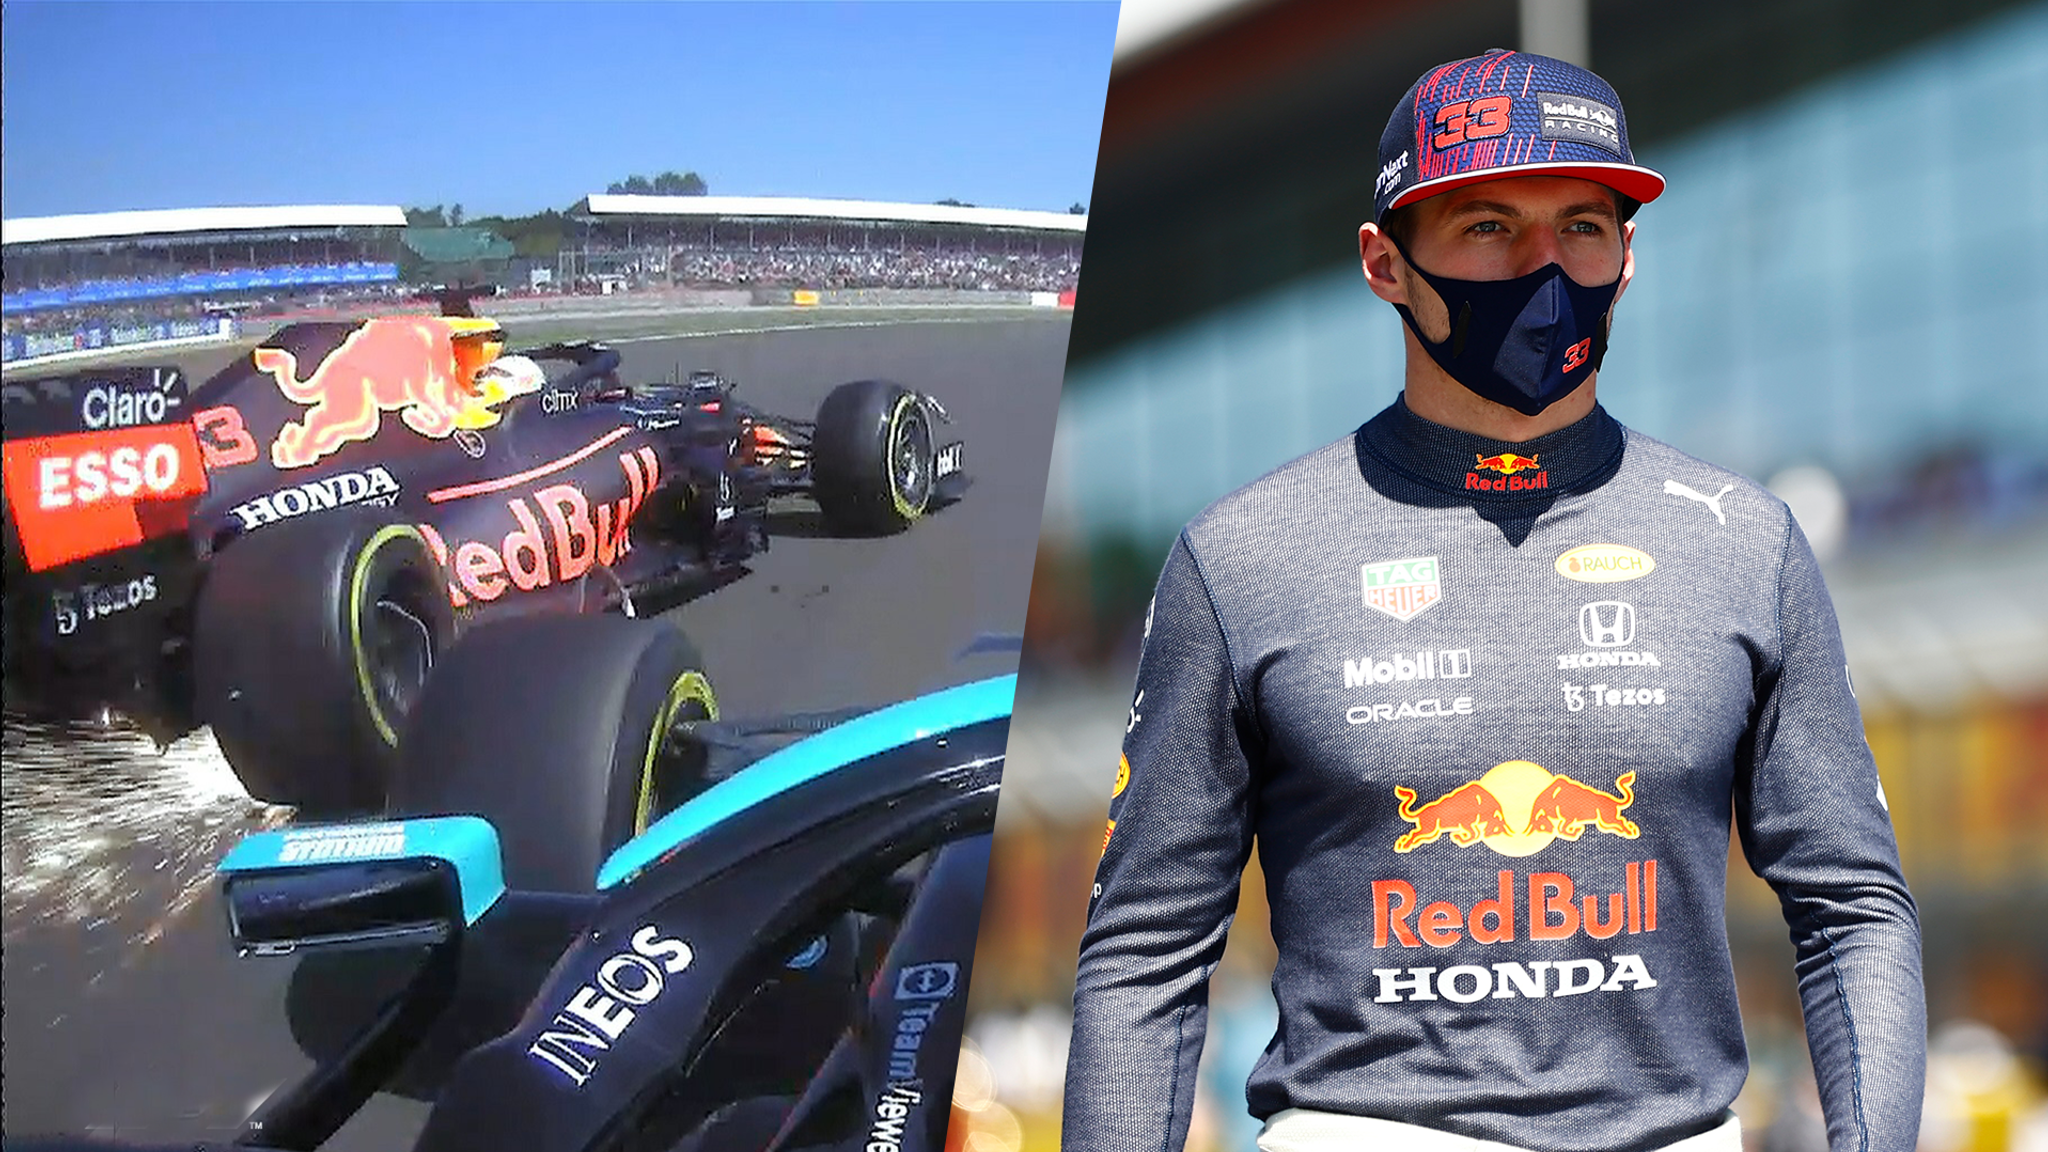 Vereniging munt commando Max Verstappen crash repair bill £1.3m say Red Bull, as they continue to  mull request to review Lewis Hamilton penalty | F1 News